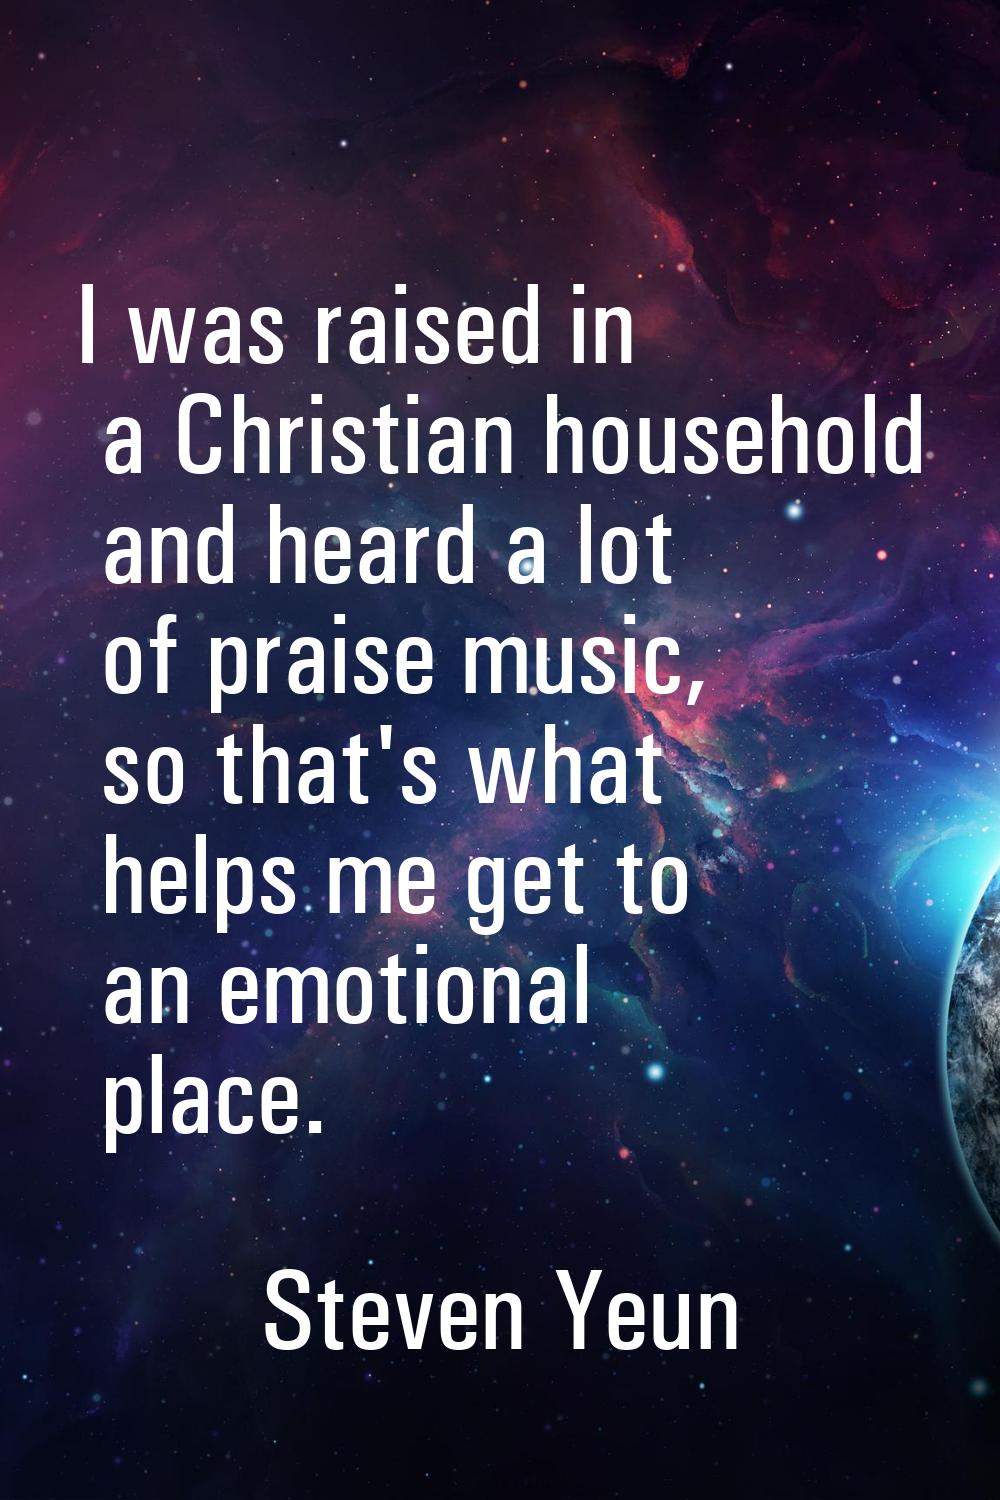 I was raised in a Christian household and heard a lot of praise music, so that's what helps me get 